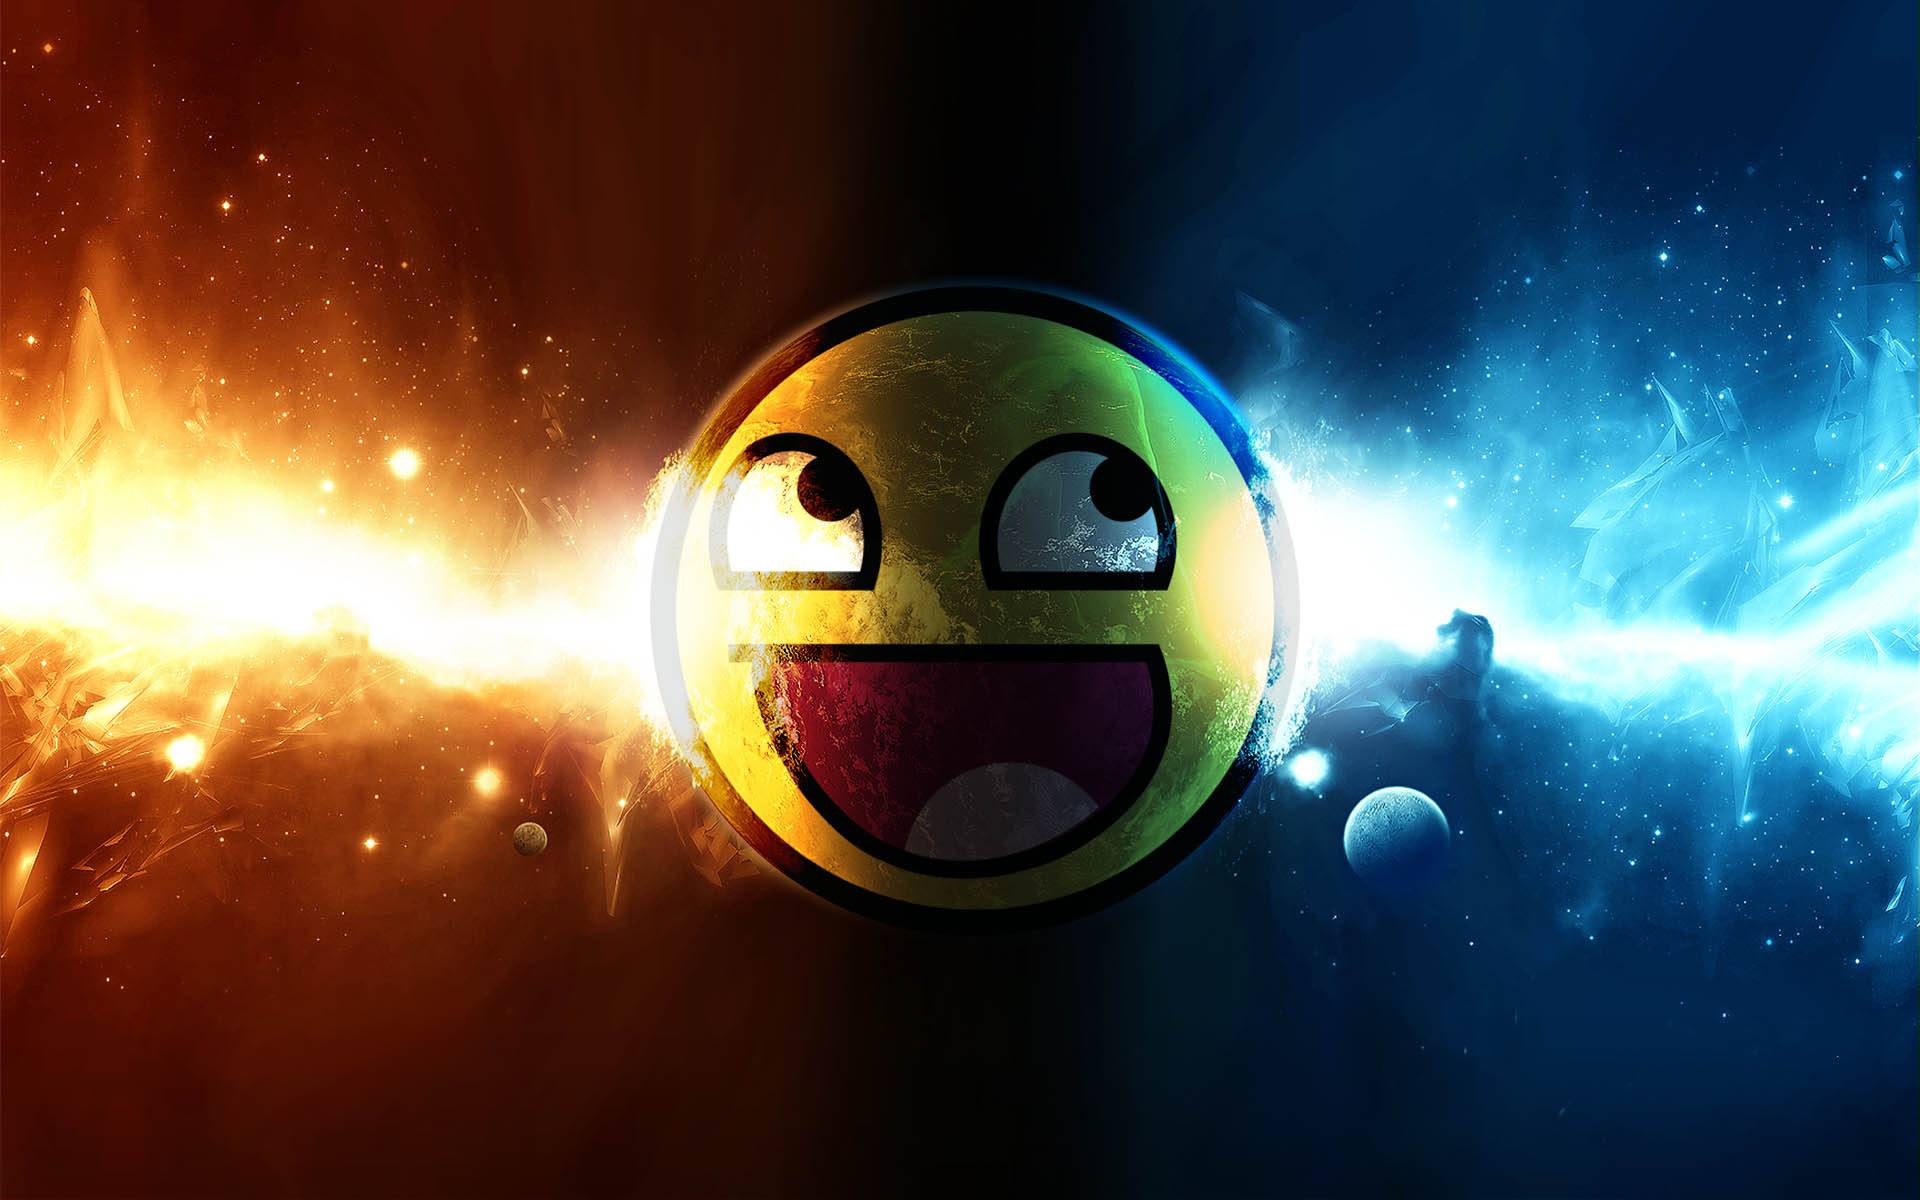  Awesome Cool 3D Smiley Background Wallpapers   Fullsize Wallpaper 1920x1200